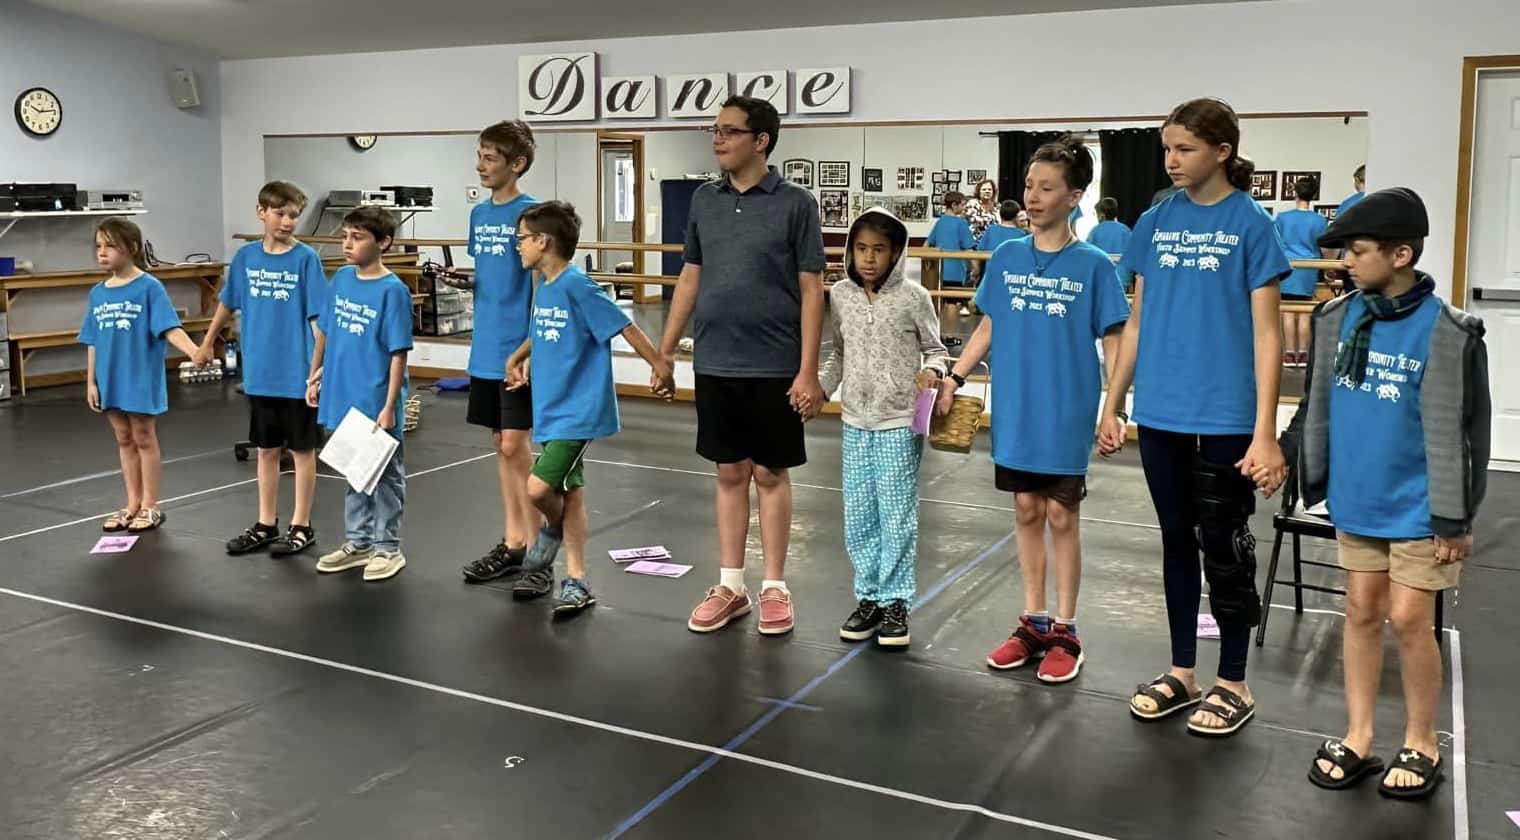 Local youth actors, actresses take part in Tomahawk Community Theater workshop, play